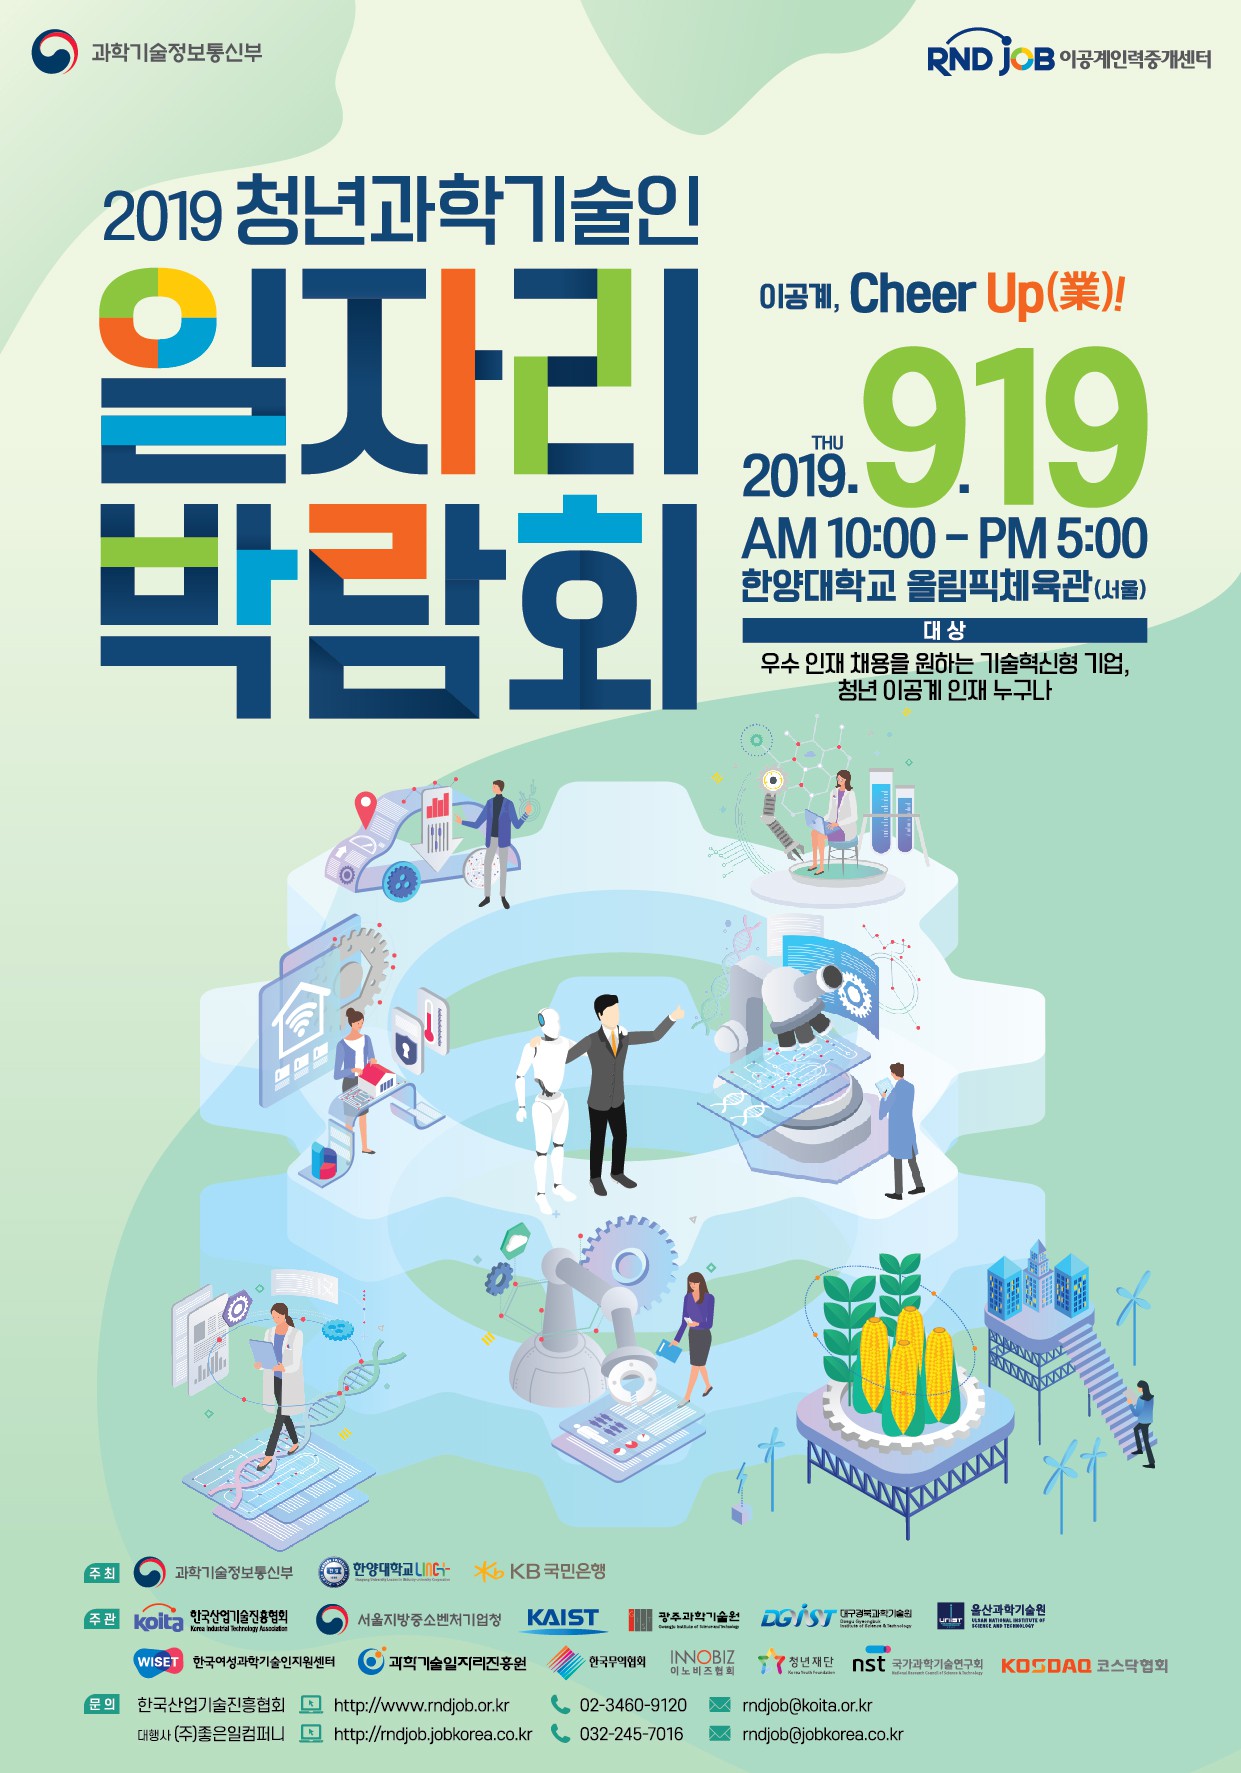 "Join a technology start-up company!" 2019 Job Fair for Young Scientists 이미지